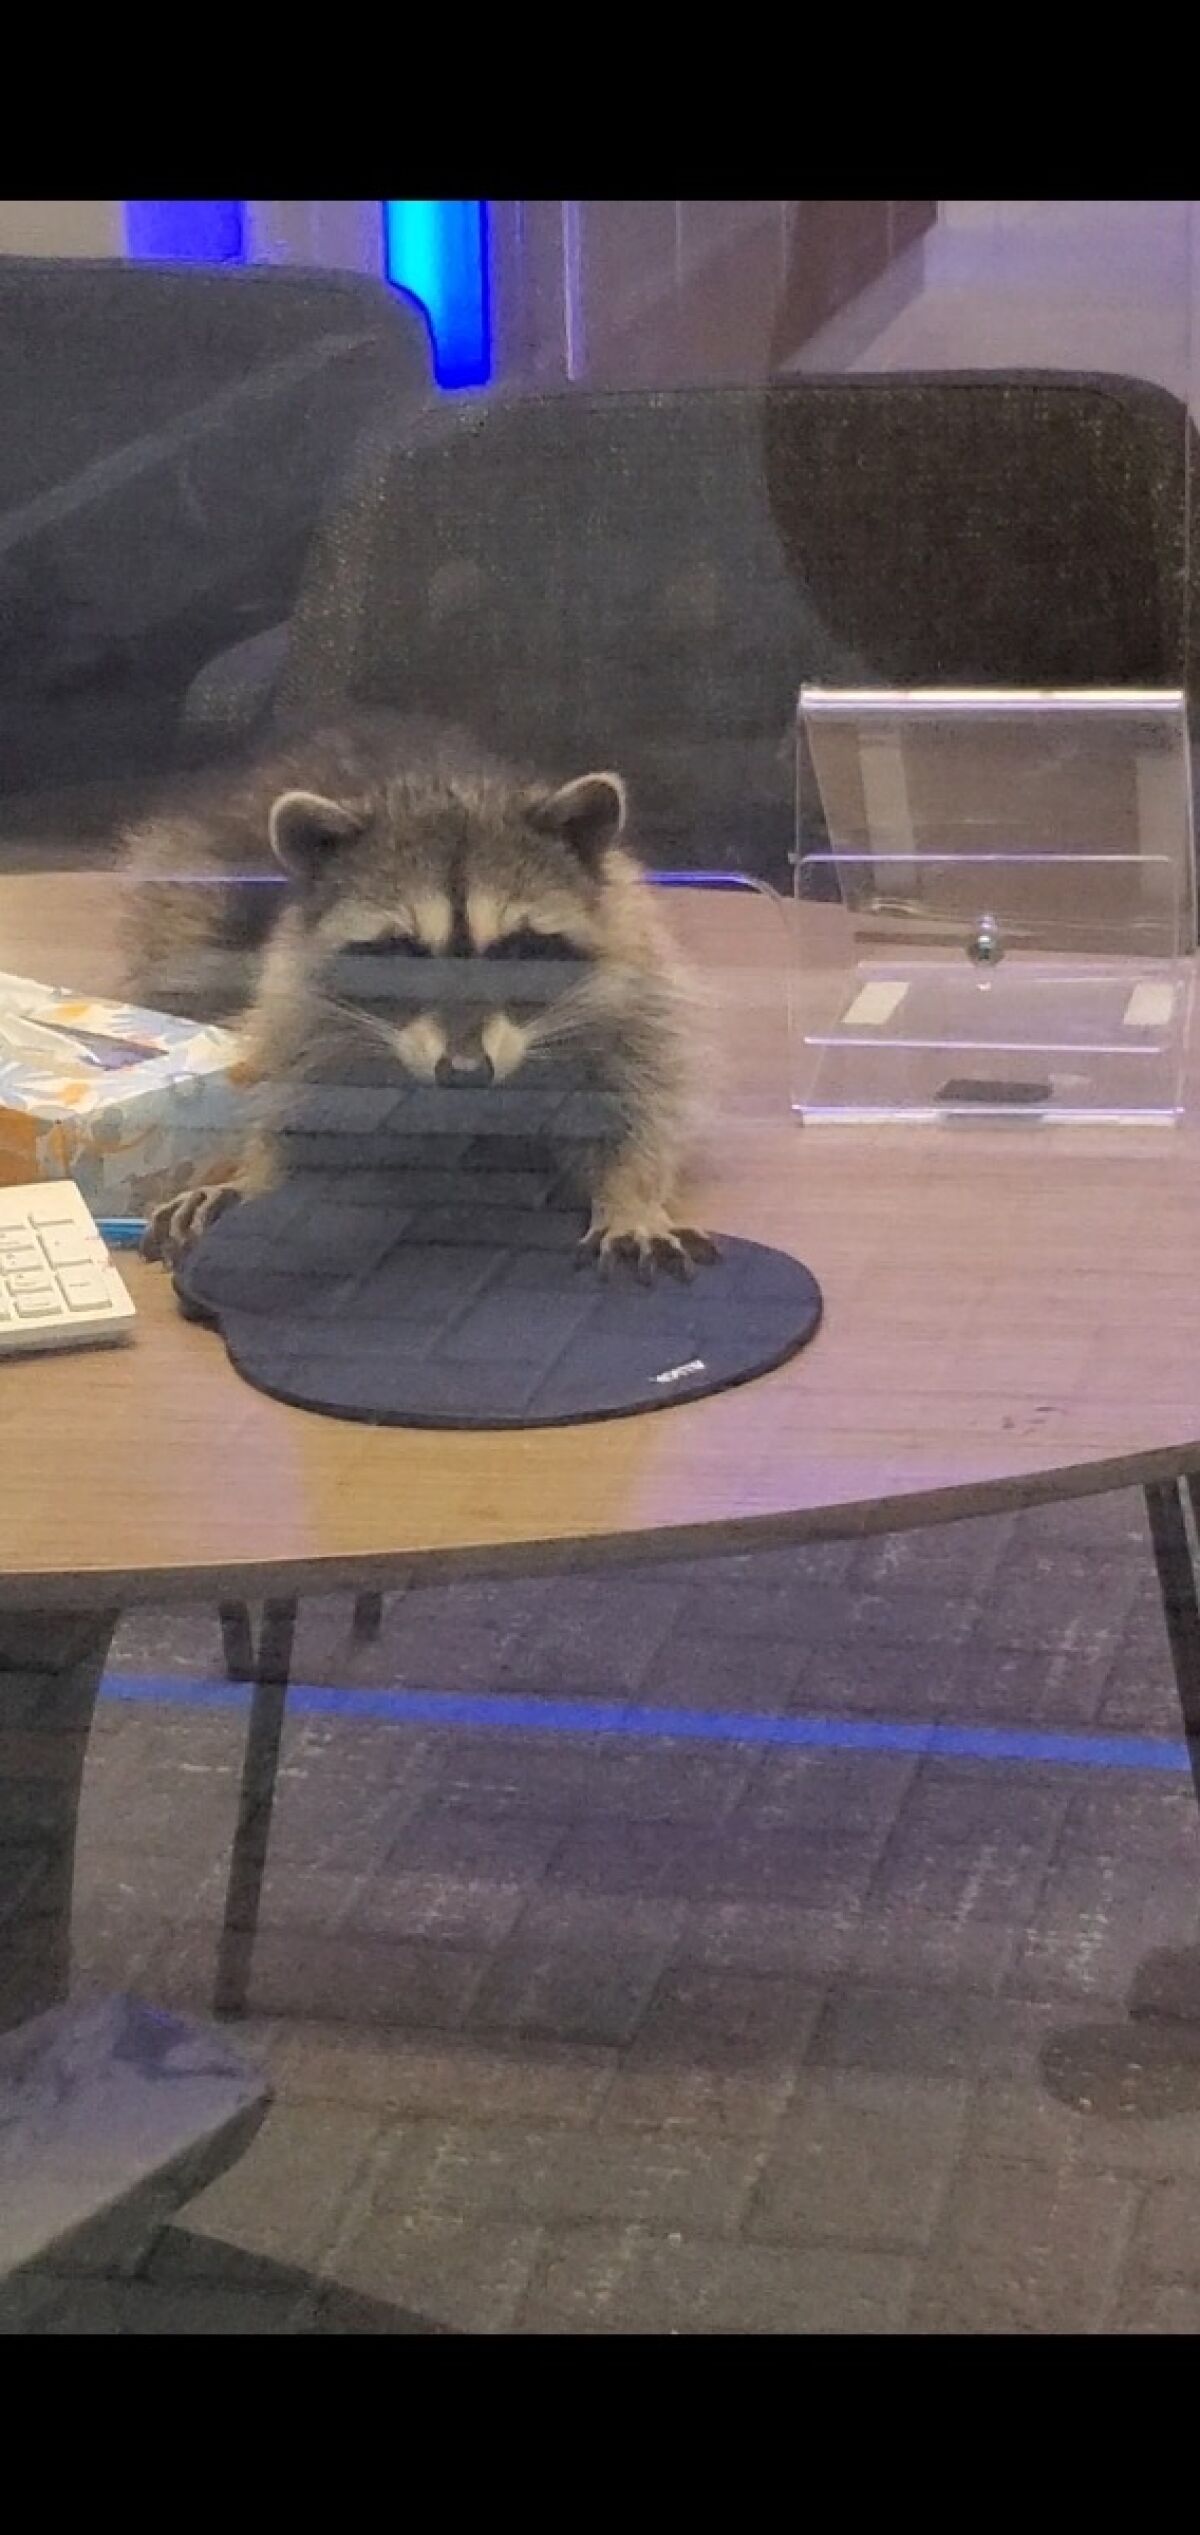 Two raccoons broke into a Redwood City Chase Bank, stealing almond cookies as their bounty.